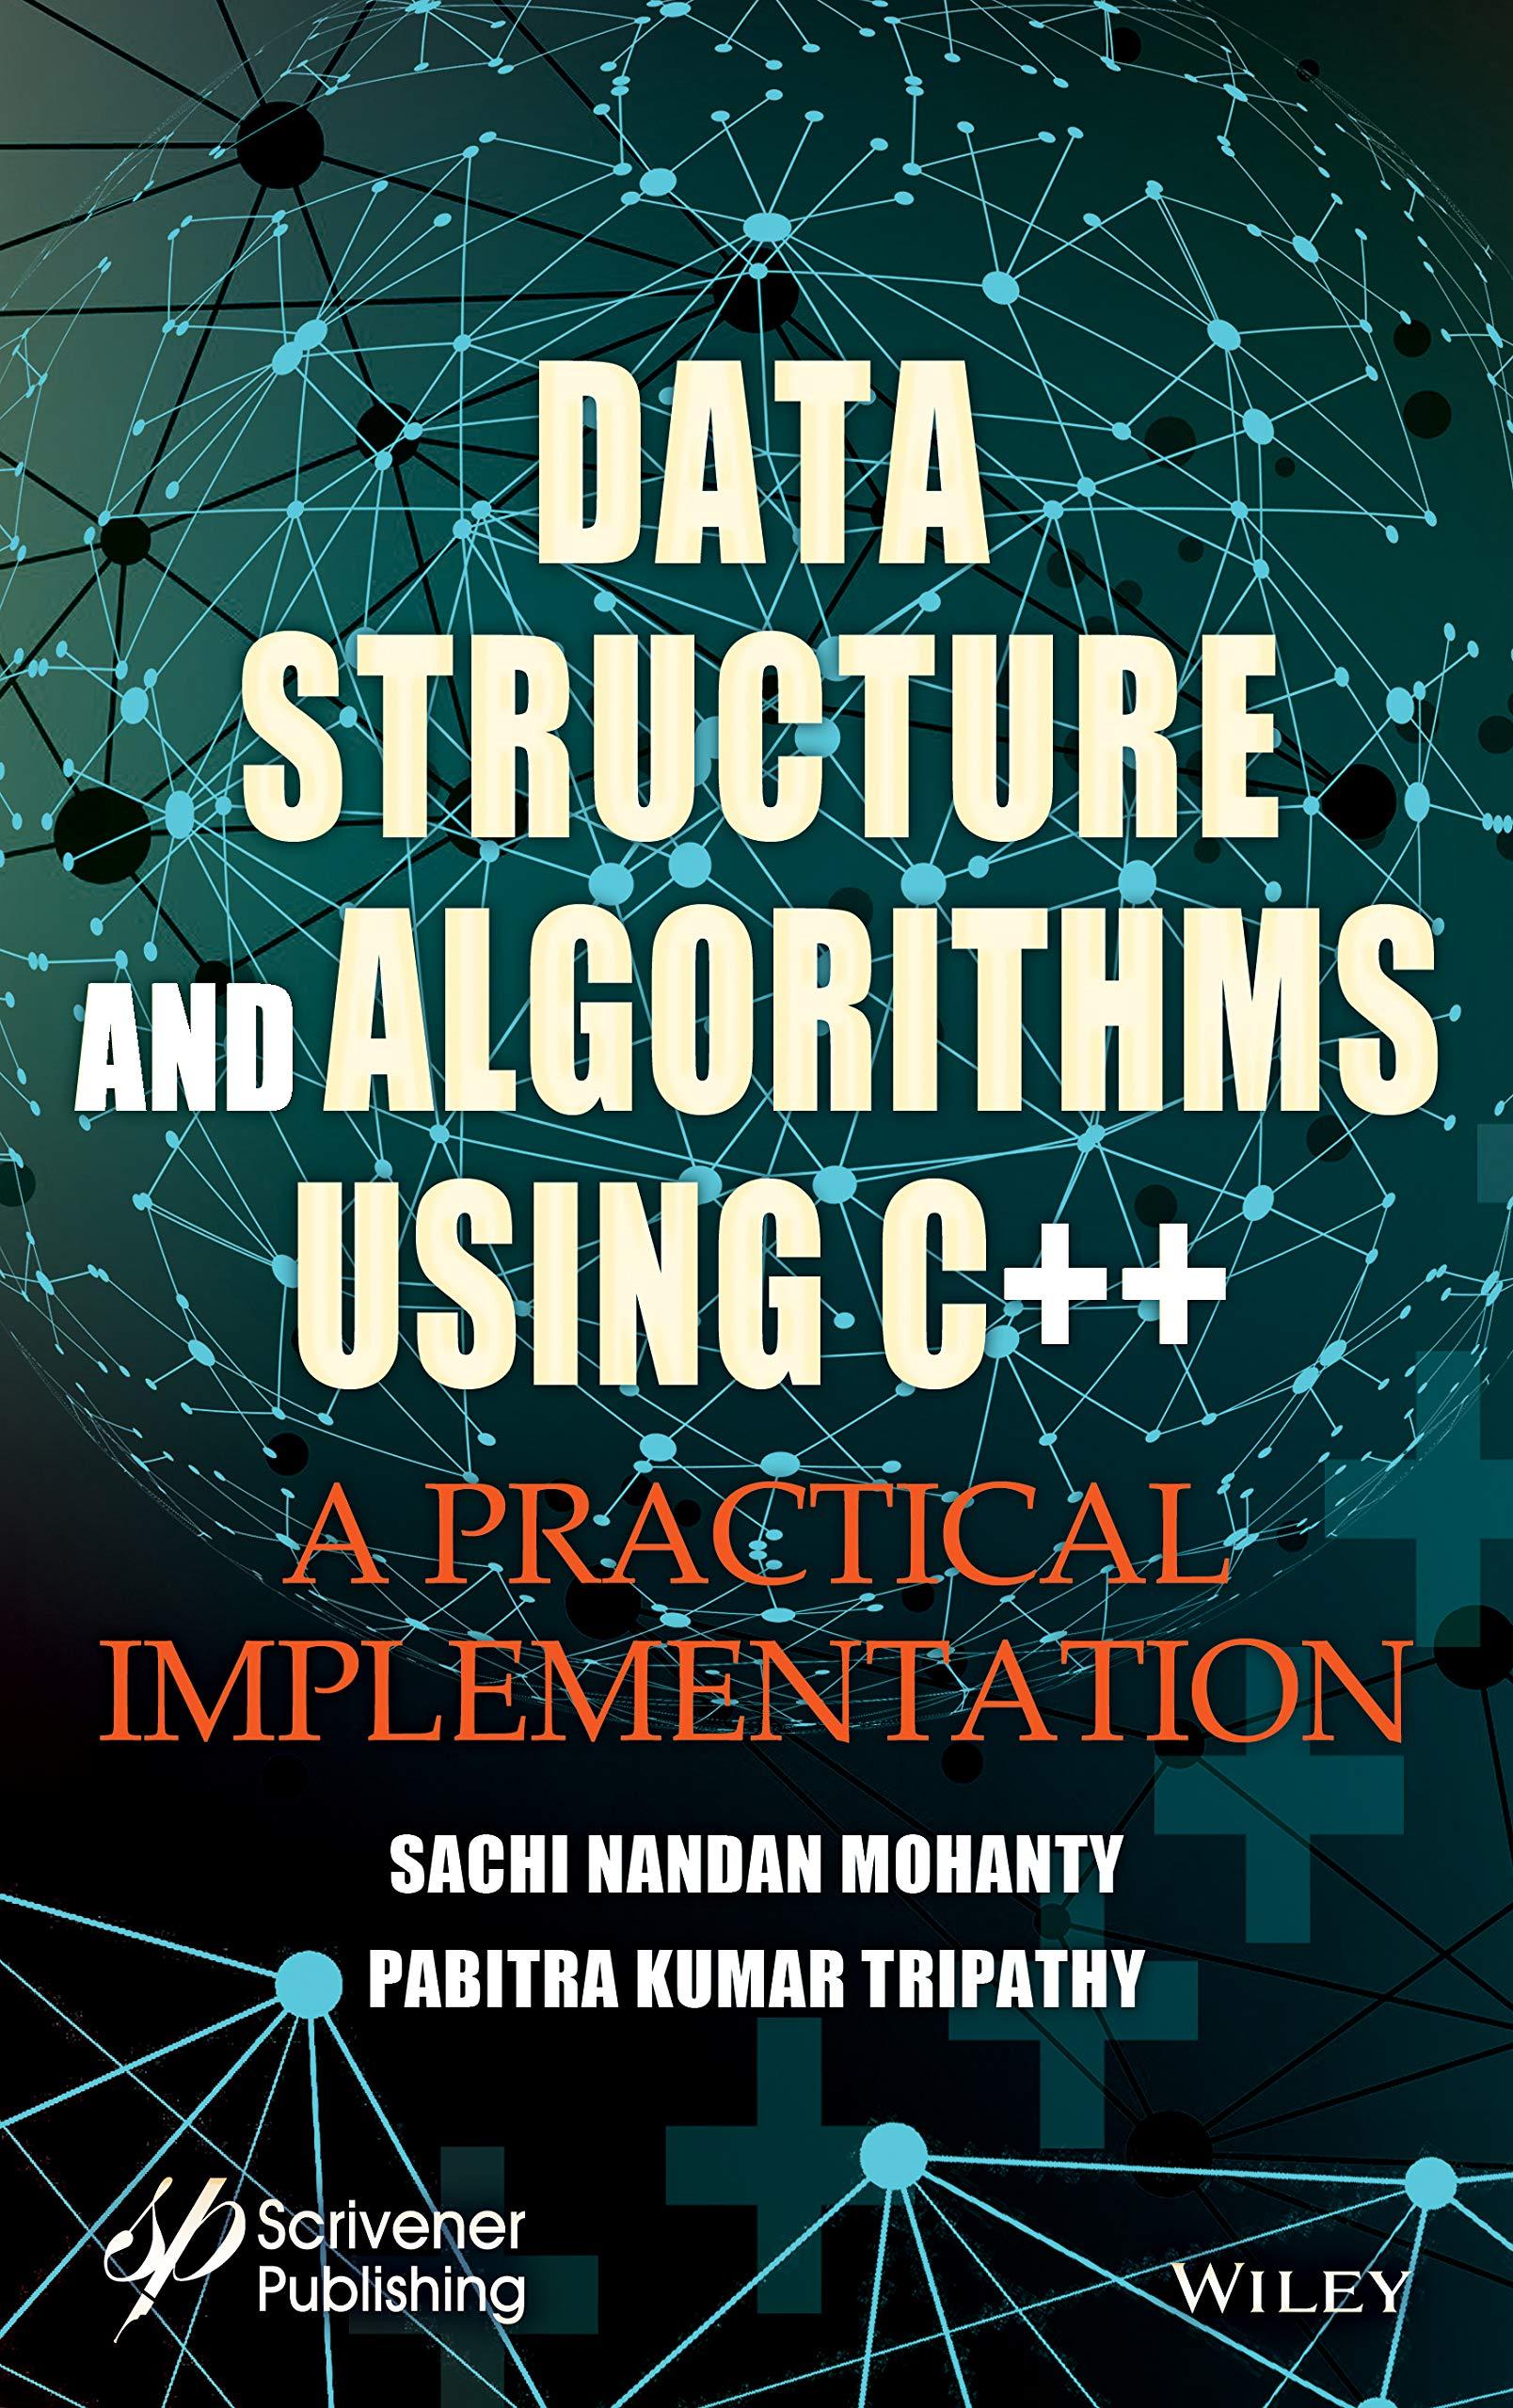 data structure and algorithms using c++ a practical implementation 1st edition sachi nandan mohanty, pabitra